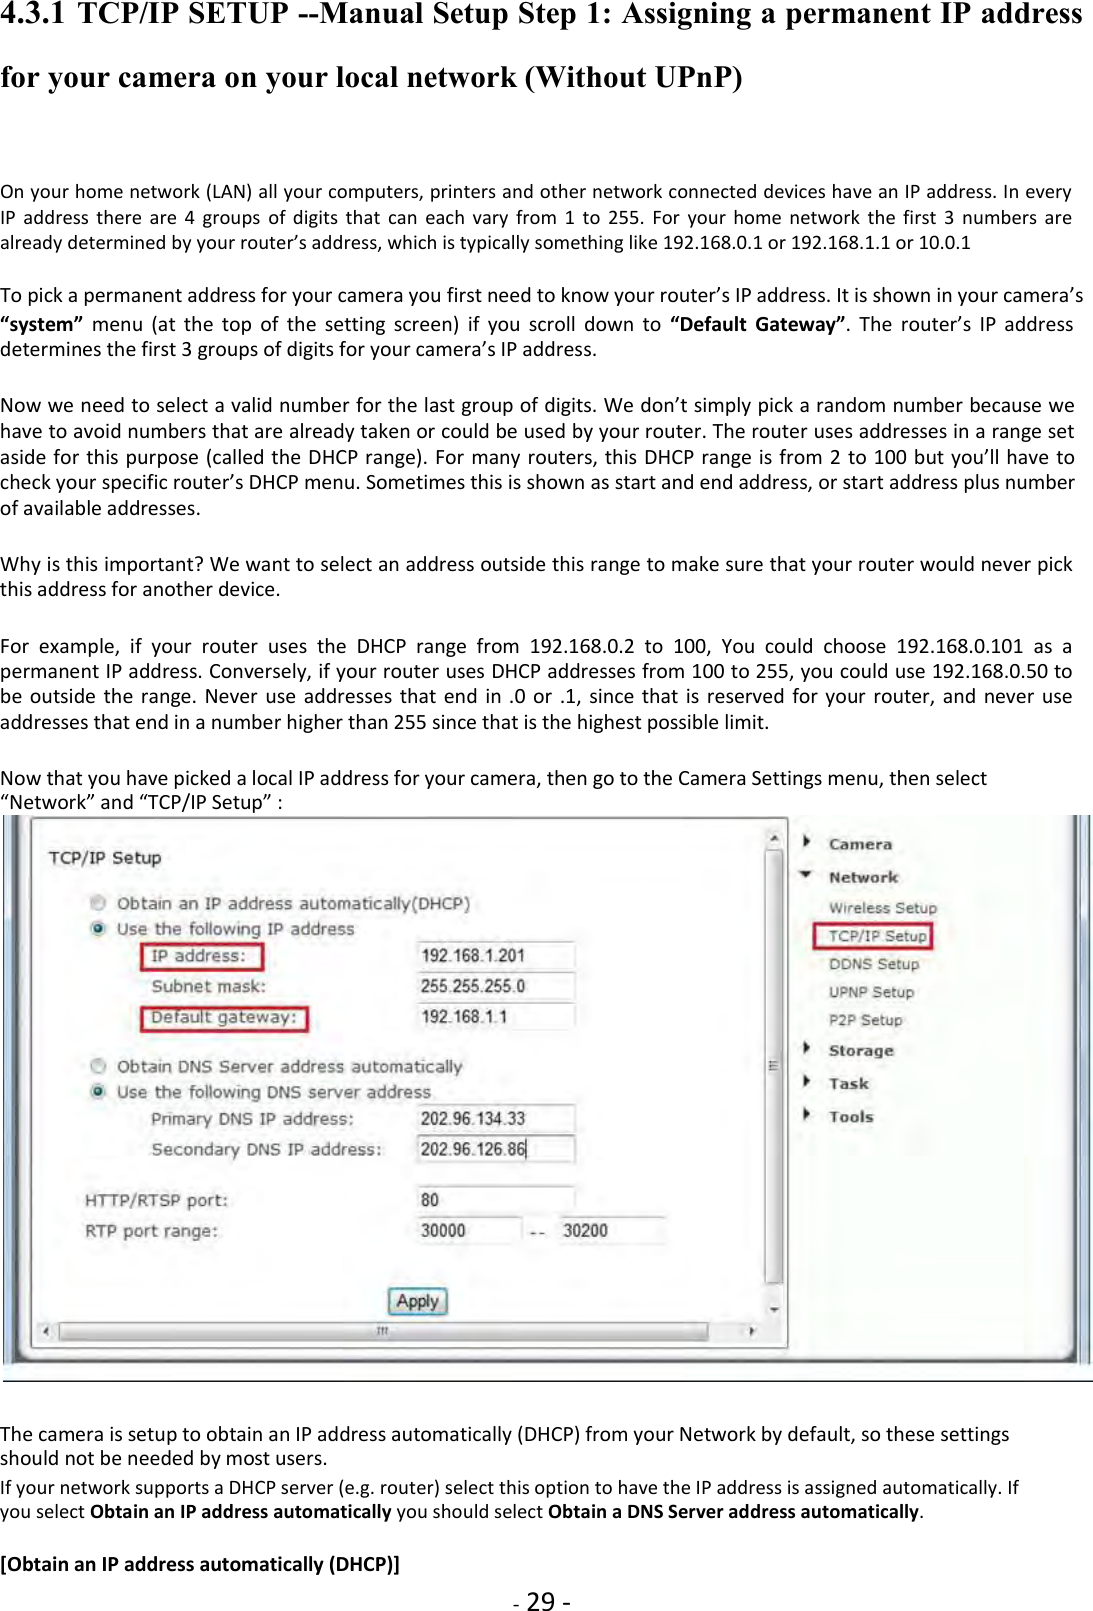    - 29 - 4.3.1 TCP/IP SETUP --Manual Setup Step 1: Assigning a permanent IP address for your camera on your local network (Without UPnP)  On your home network (LAN) all your computers, printers and other network connected devices have an IP address. In every IP  address  there  are  4  groups  of  digits  that  can  each  vary  from  1  to  255.  For  your  home  network  the  first  3  numbers  are already determined by your router’s address, which is typically something like 192.168.0.1 or 192.168.1.1 or 10.0.1  To pick a permanent address for your camera you first need to know your router’s IP address. It is shown in your camera’s  “system”  menu  (at  the  top  of  the  setting  screen)  if  you  scroll  down  to “Default  Gateway”.  The  router’s  IP  address determines the first 3 groups of digits for your camera’s IP address.  Now we need to select a valid number for the last group of digits. We don’t simply pick a random number because we have to avoid numbers that are already taken or could be used by your router. The router uses addresses in a range set aside for this purpose (called the DHCP range). For many routers, this DHCP range is from 2 to 100 but you’ll have to check your specific router’s DHCP menu. Sometimes this is shown as start and end address, or start address plus number of available addresses.  Why is this important? We want to select an address outside this range to make sure that your router would never pick this address for another device.  For  example,  if  your  router  uses  the  DHCP  range  from  192.168.0.2  to  100,  You  could  choose  192.168.0.101  as  a permanent IP address. Conversely, if your router uses DHCP addresses from 100 to 255, you could use 192.168.0.50 to be  outside  the range.  Never use  addresses that  end in  .0 or  .1,  since  that is  reserved  for your  router,  and never use addresses that end in a number higher than 255 since that is the highest possible limit.  Now that you have picked a local IP address for your camera, then go to the Camera Settings menu, then select “Network” and “TCP/IP Setup” :   The camera is setup to obtain an IP address automatically (DHCP) from your Network by default, so these settings should not be needed by most users.  If your network supports a DHCP server (e.g. router) select this option to have the IP address is assigned automatically. If you select Obtain an IP address automatically you should select Obtain a DNS Server address automatically.  [Obtain an IP address automatically (DHCP)]  